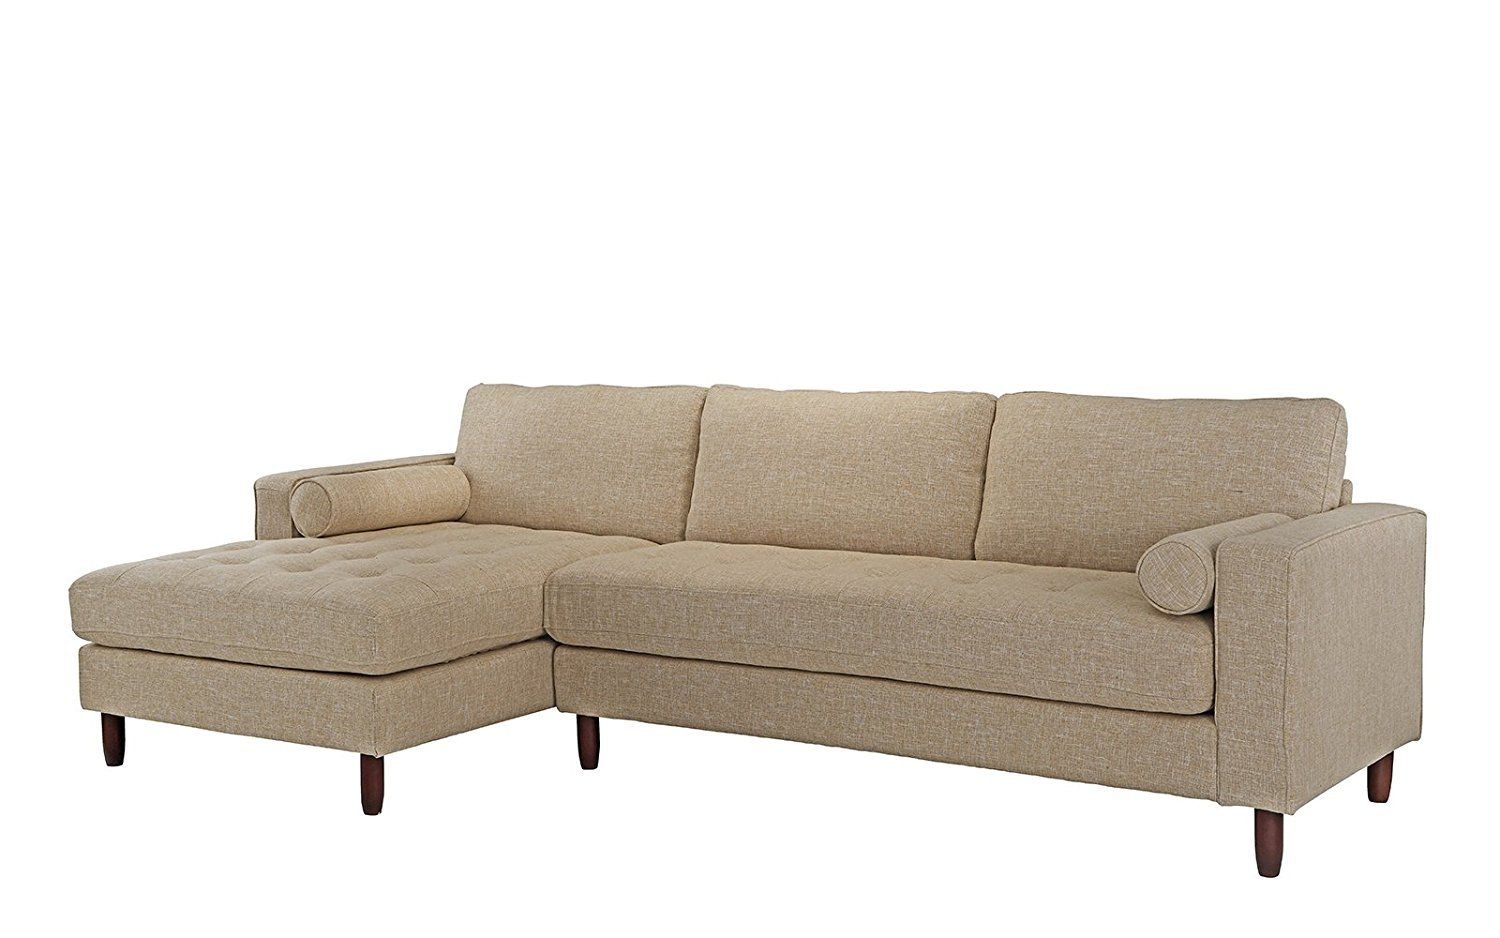 Mid Century Modern Tufted Fabric Sectional Sofa, L Shape Couch Beige Throughout Small L Shaped Sectional Sofas In Beige (Gallery 10 of 21)